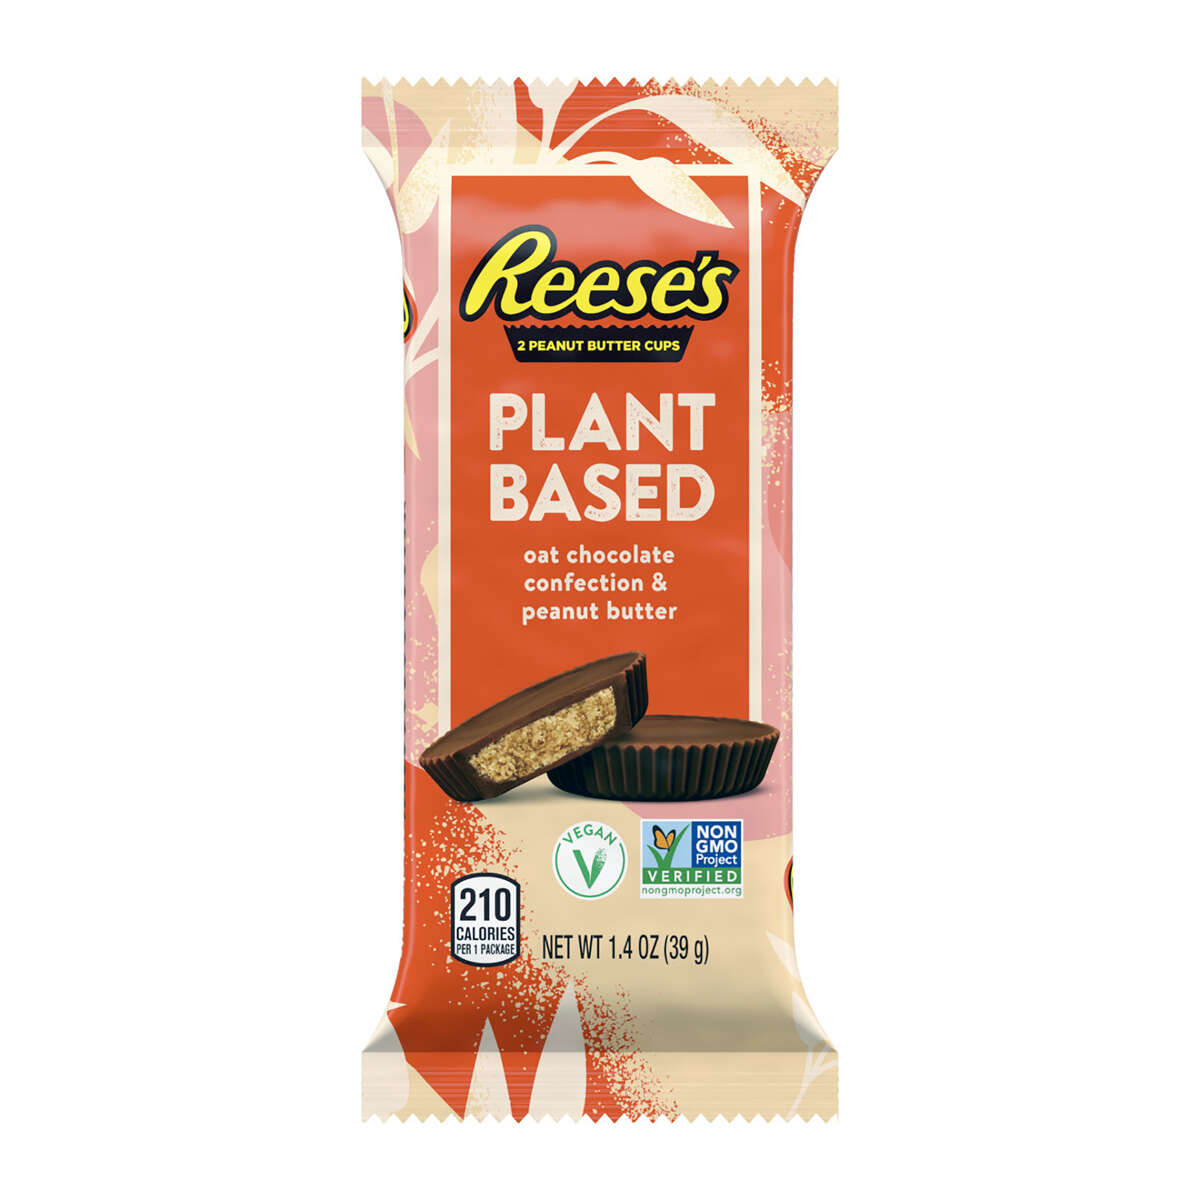 The Hershey Co. is coming out with new plant-based Reese's peanut butter cups. Hershey said Reese's plant-based peanut butter cups will be its first plant-based chocolate sold nationally when they go on sale this month. A second vegan offering, Hershey's plant-based extra creamy with almonds and sea salt, will follow in April.